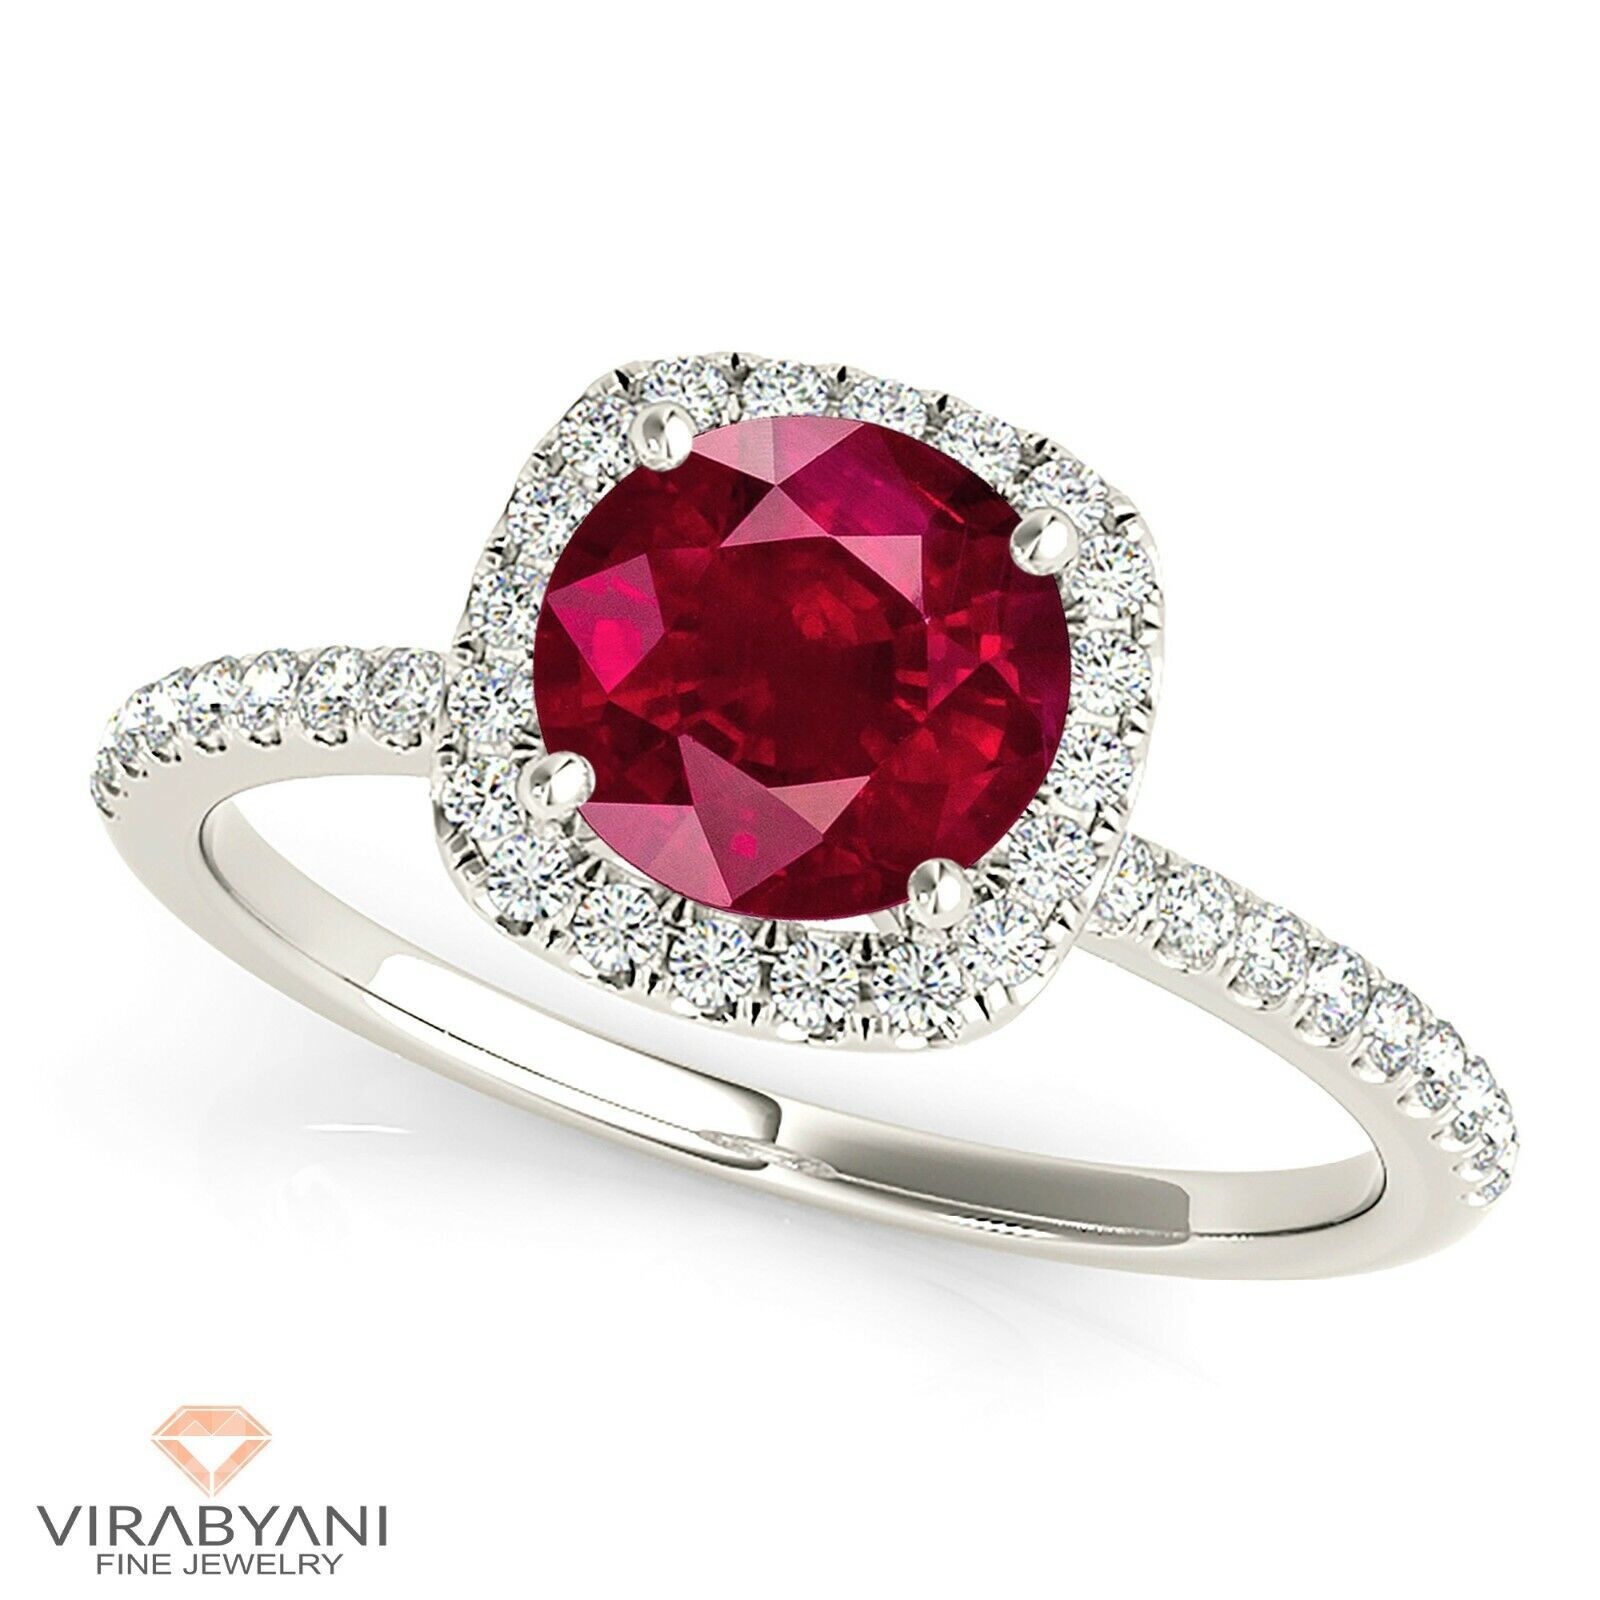 2.35 Ct. Natural Ruby Ring With 0.45 Ctw (View 14 of 25)